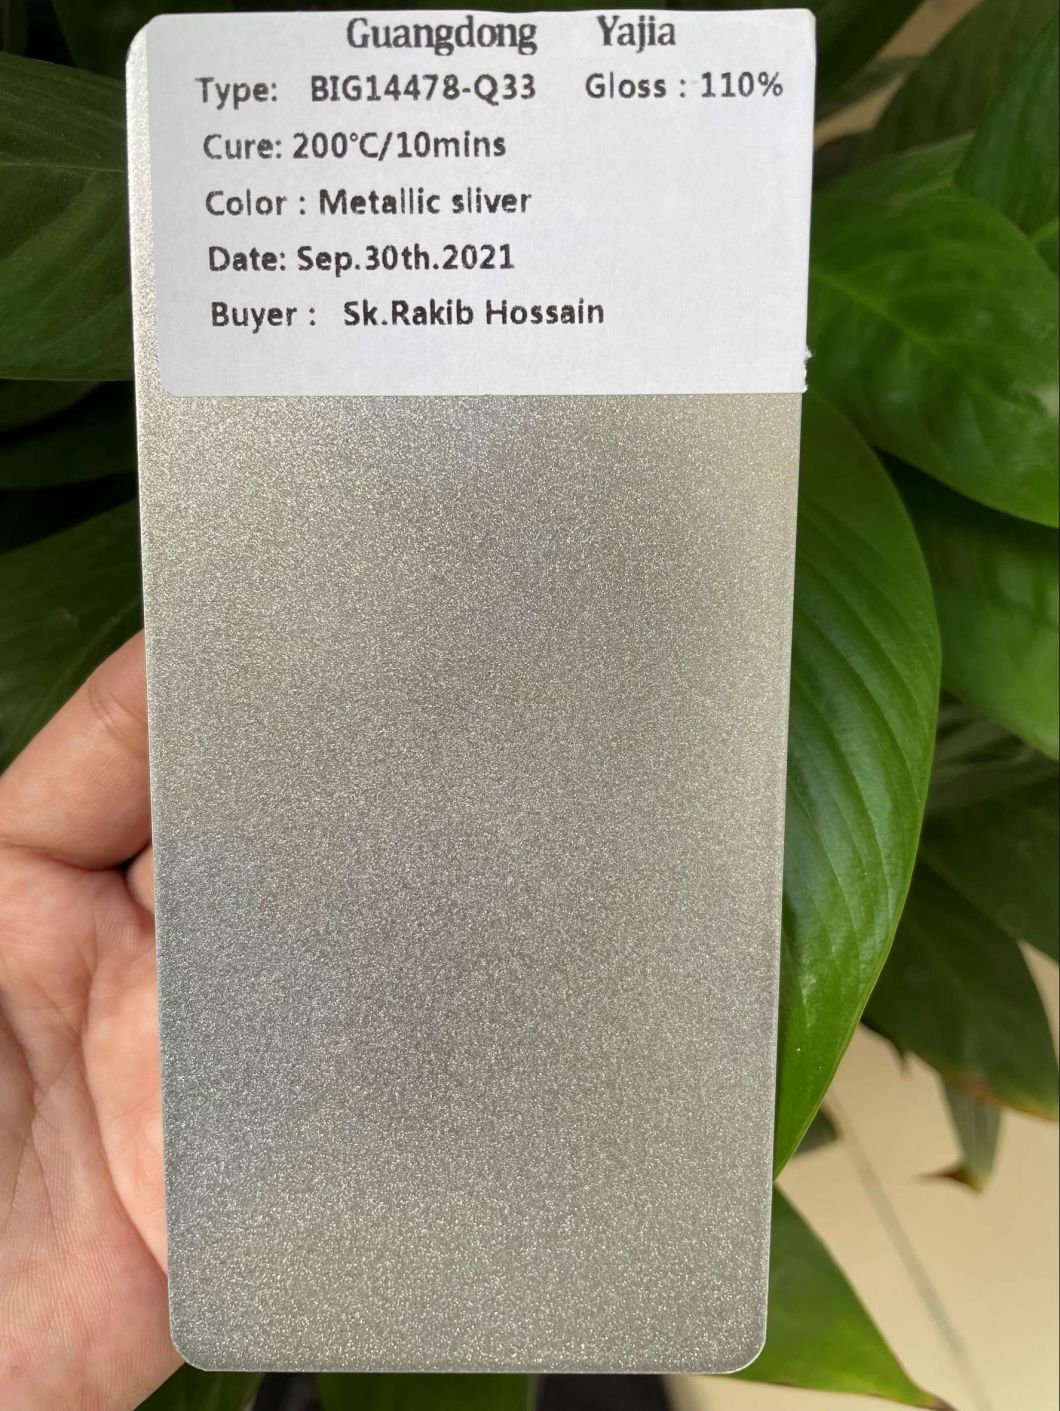 Ral9006 Metallic Silver Moire Sand Texture Powder Coating Paint